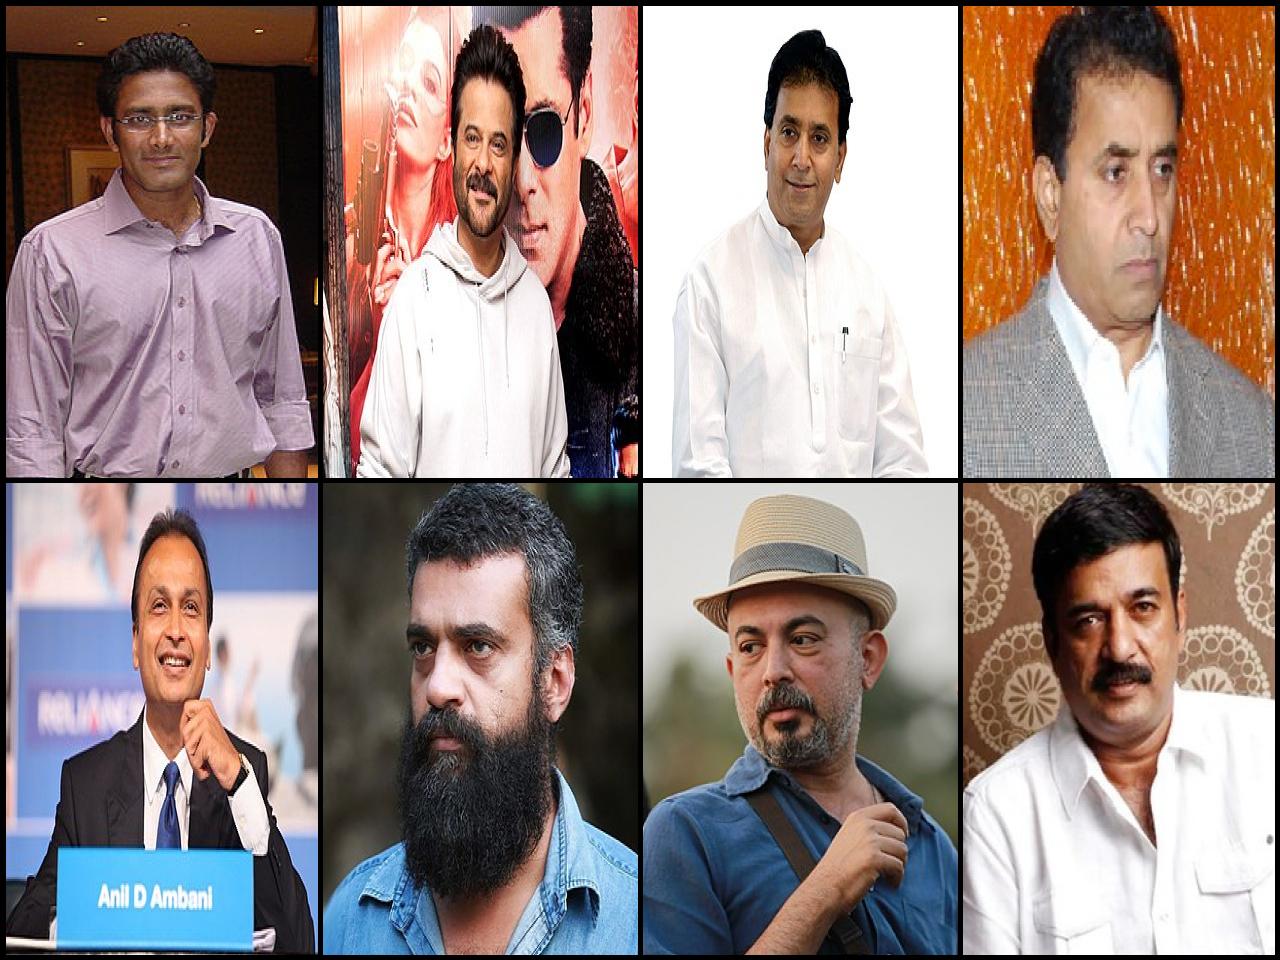 List of Famous people named <b>Anil</b>